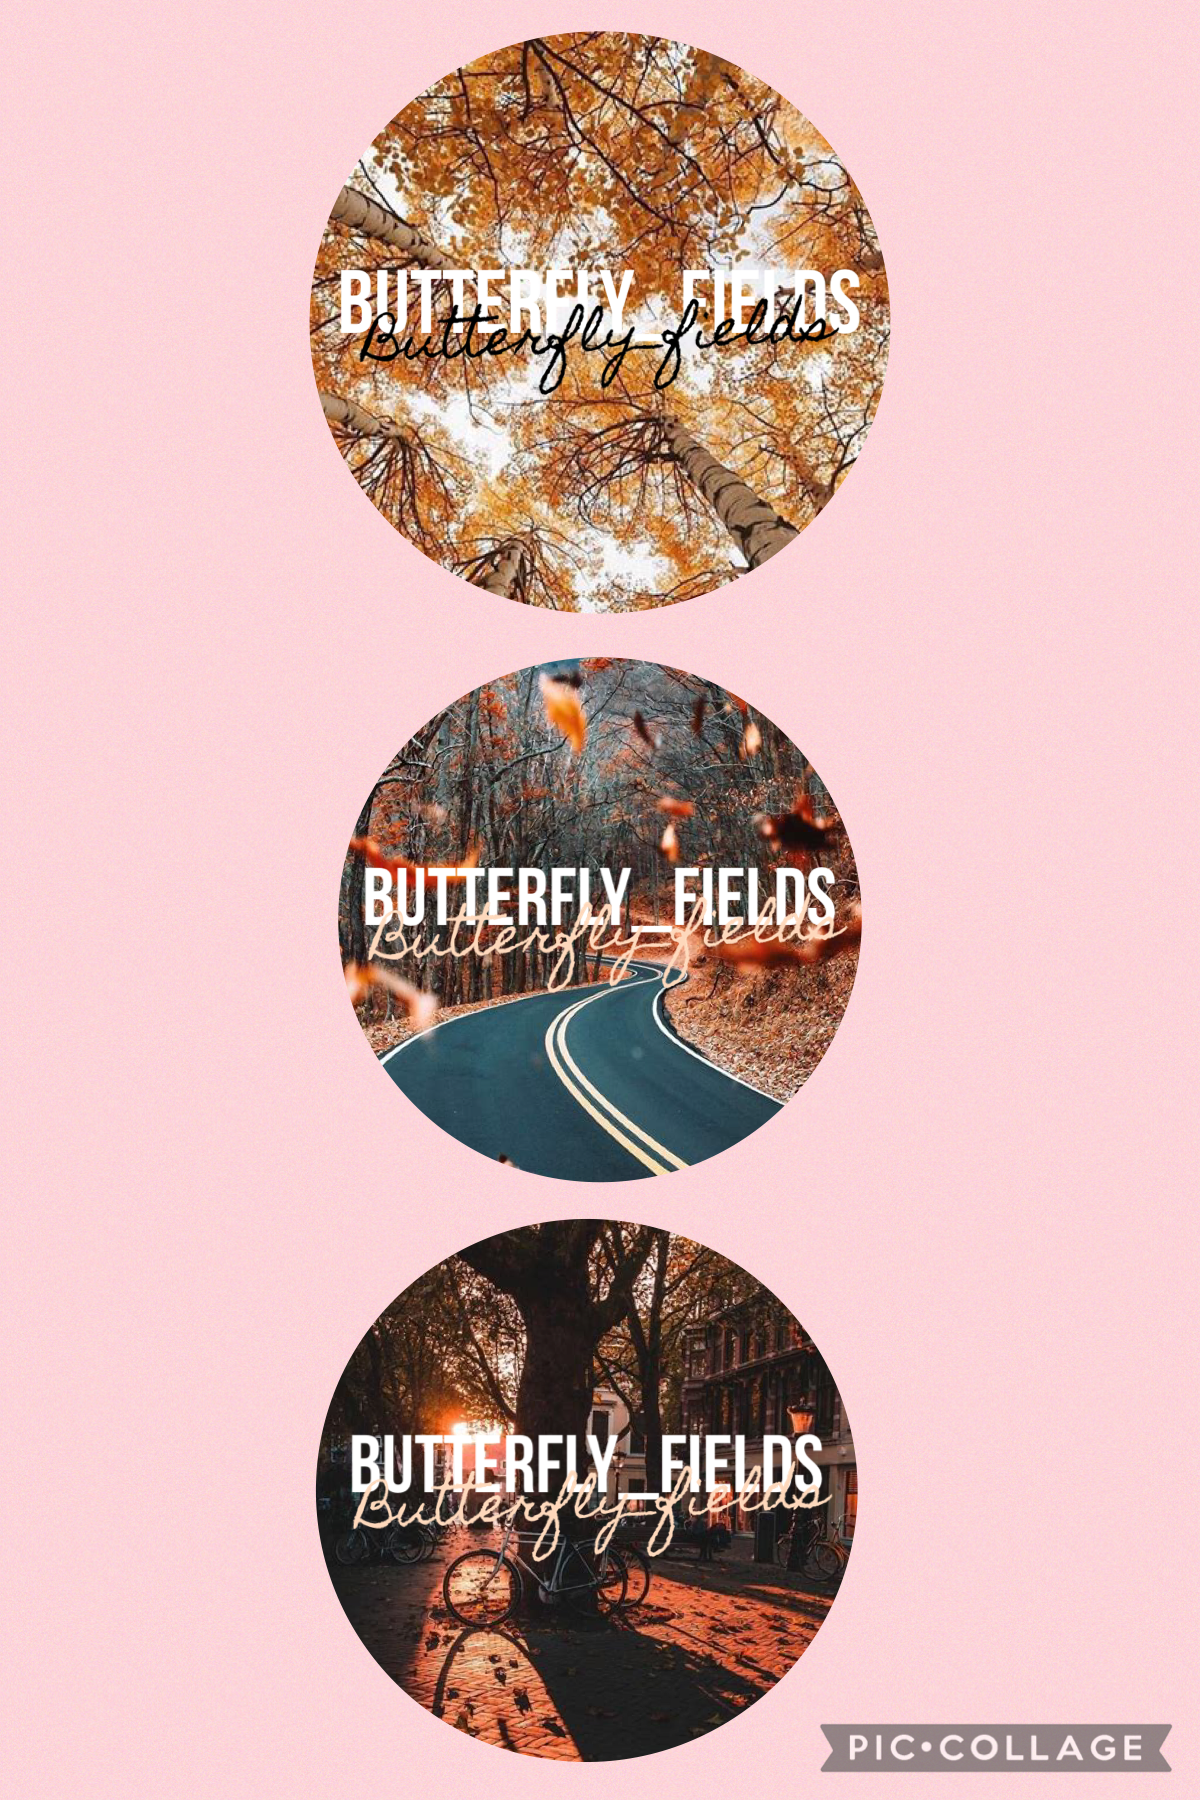 Butterfly_fields icons 